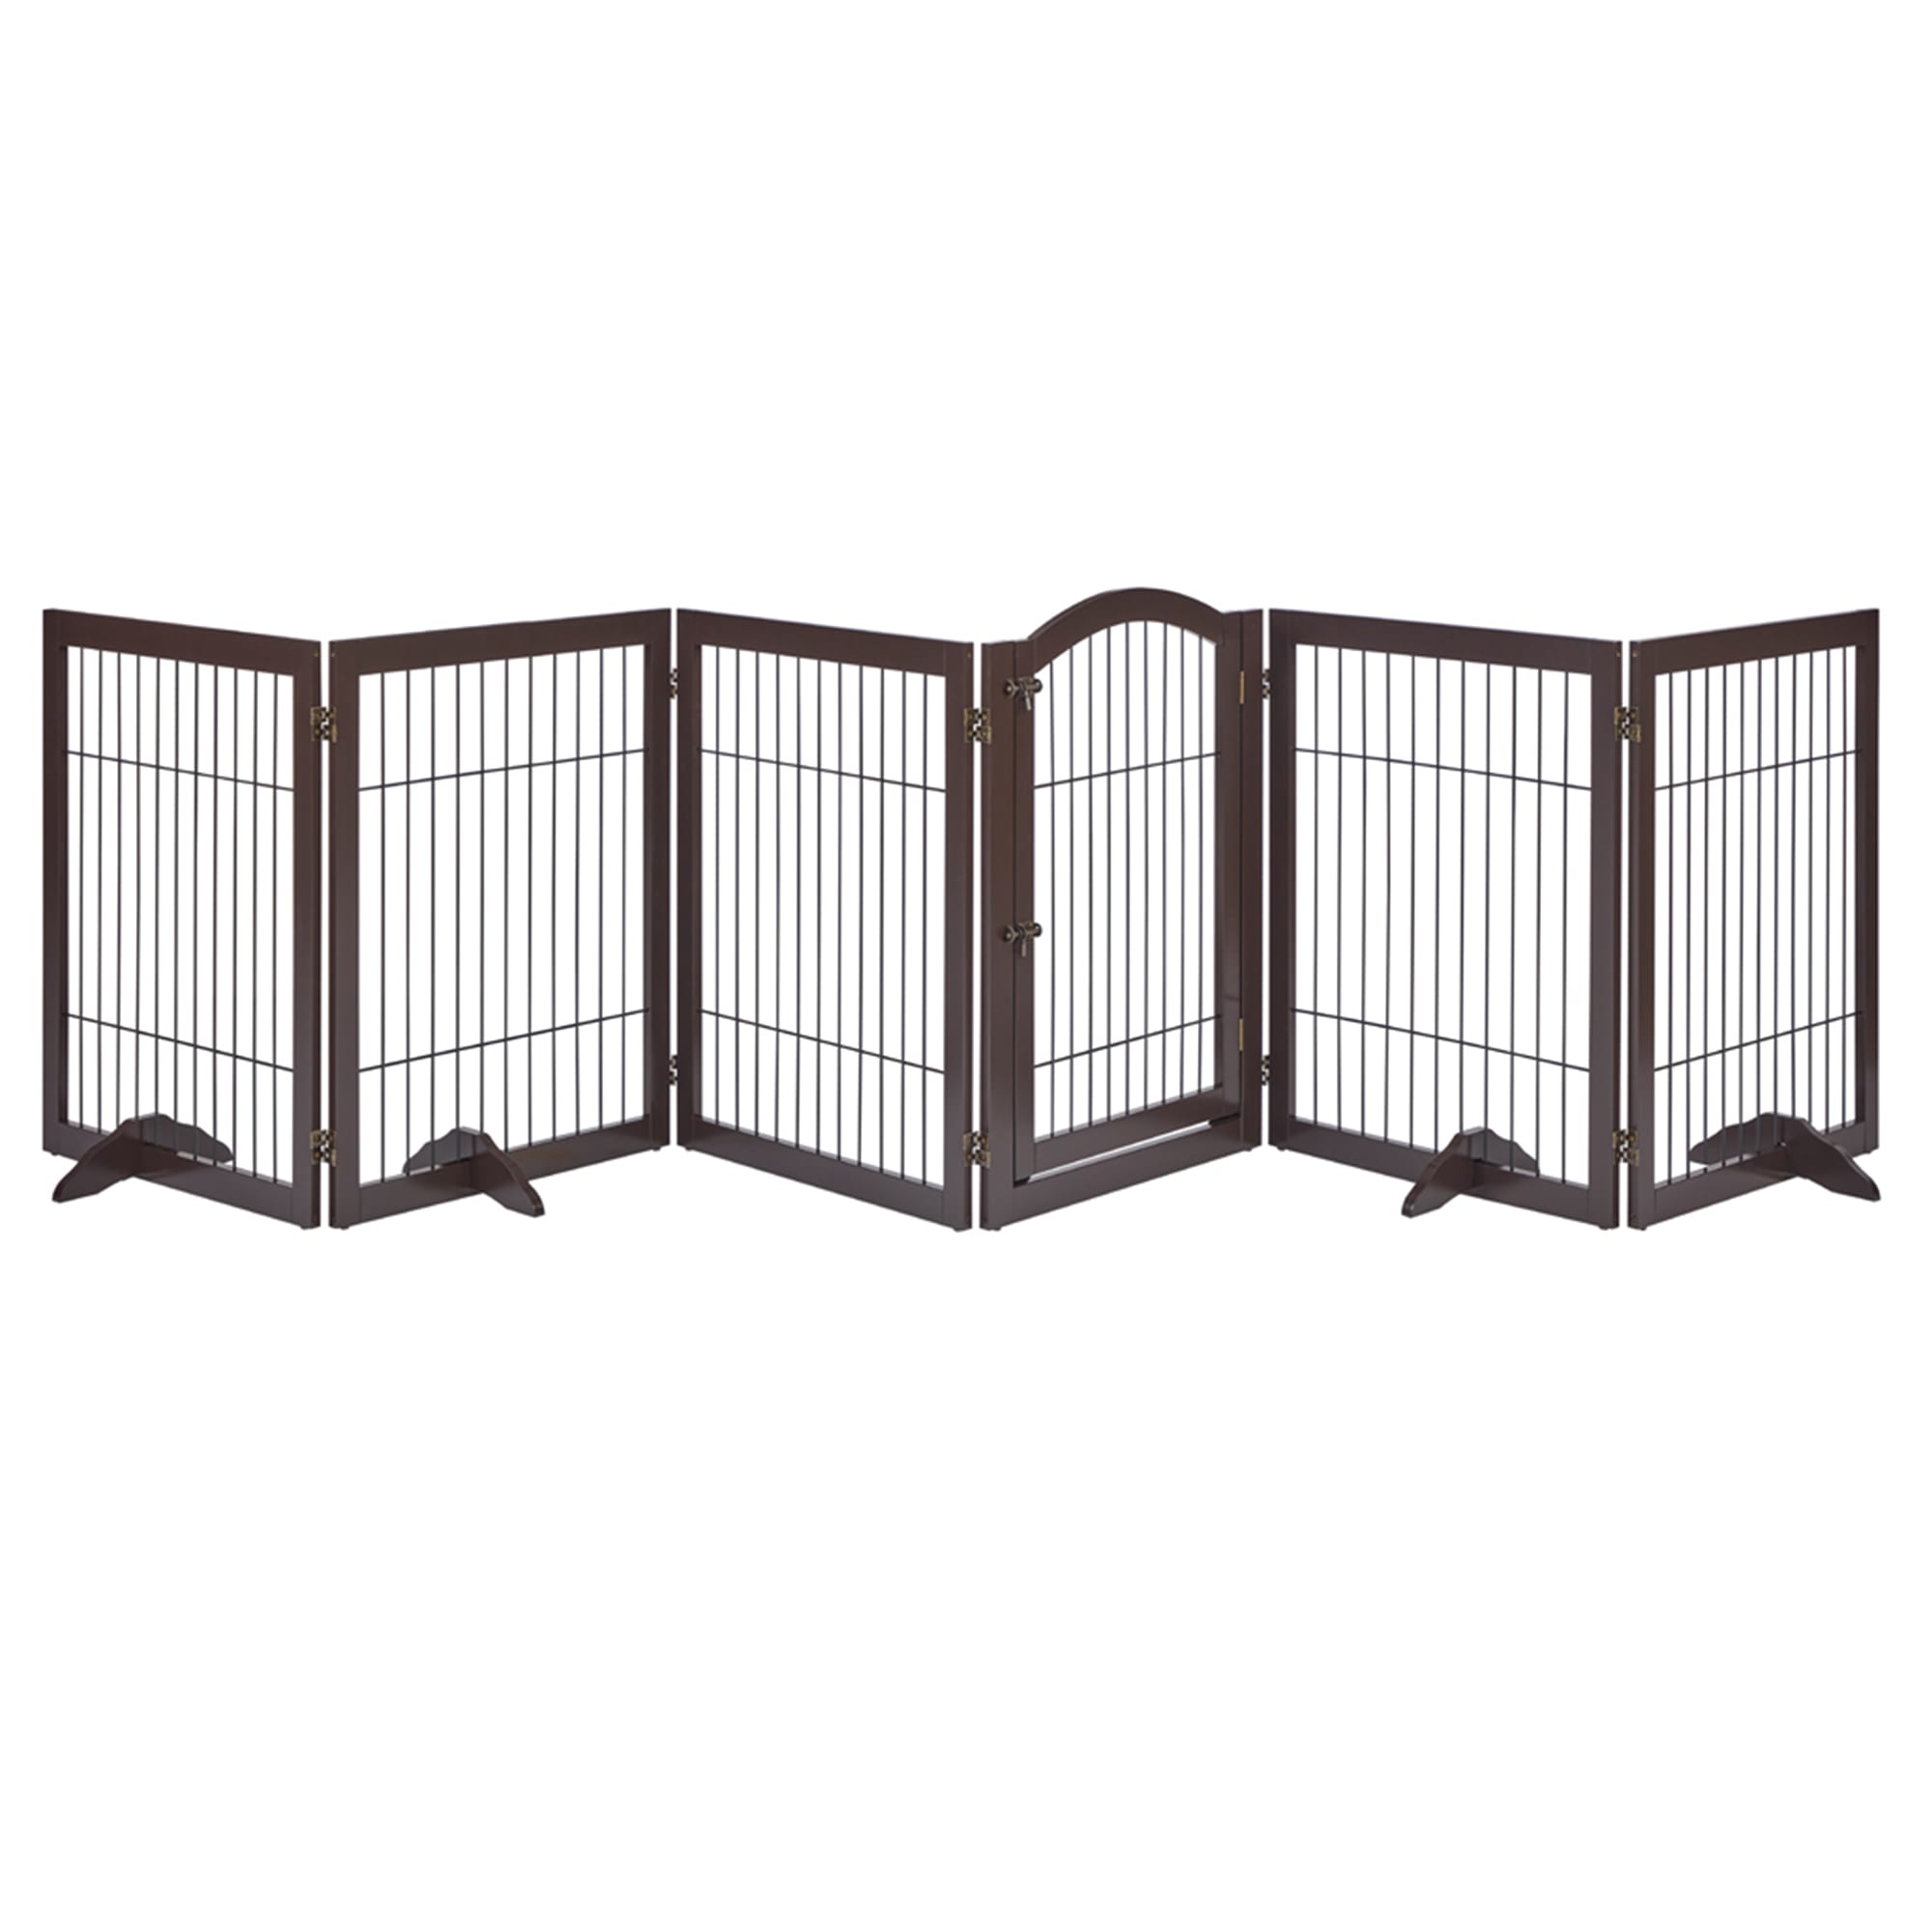 UniPaws 6 Panels Pet Espresso Gate with Wood Frame and Wire bars, 24"-144" W X 32" H, Large, Brown